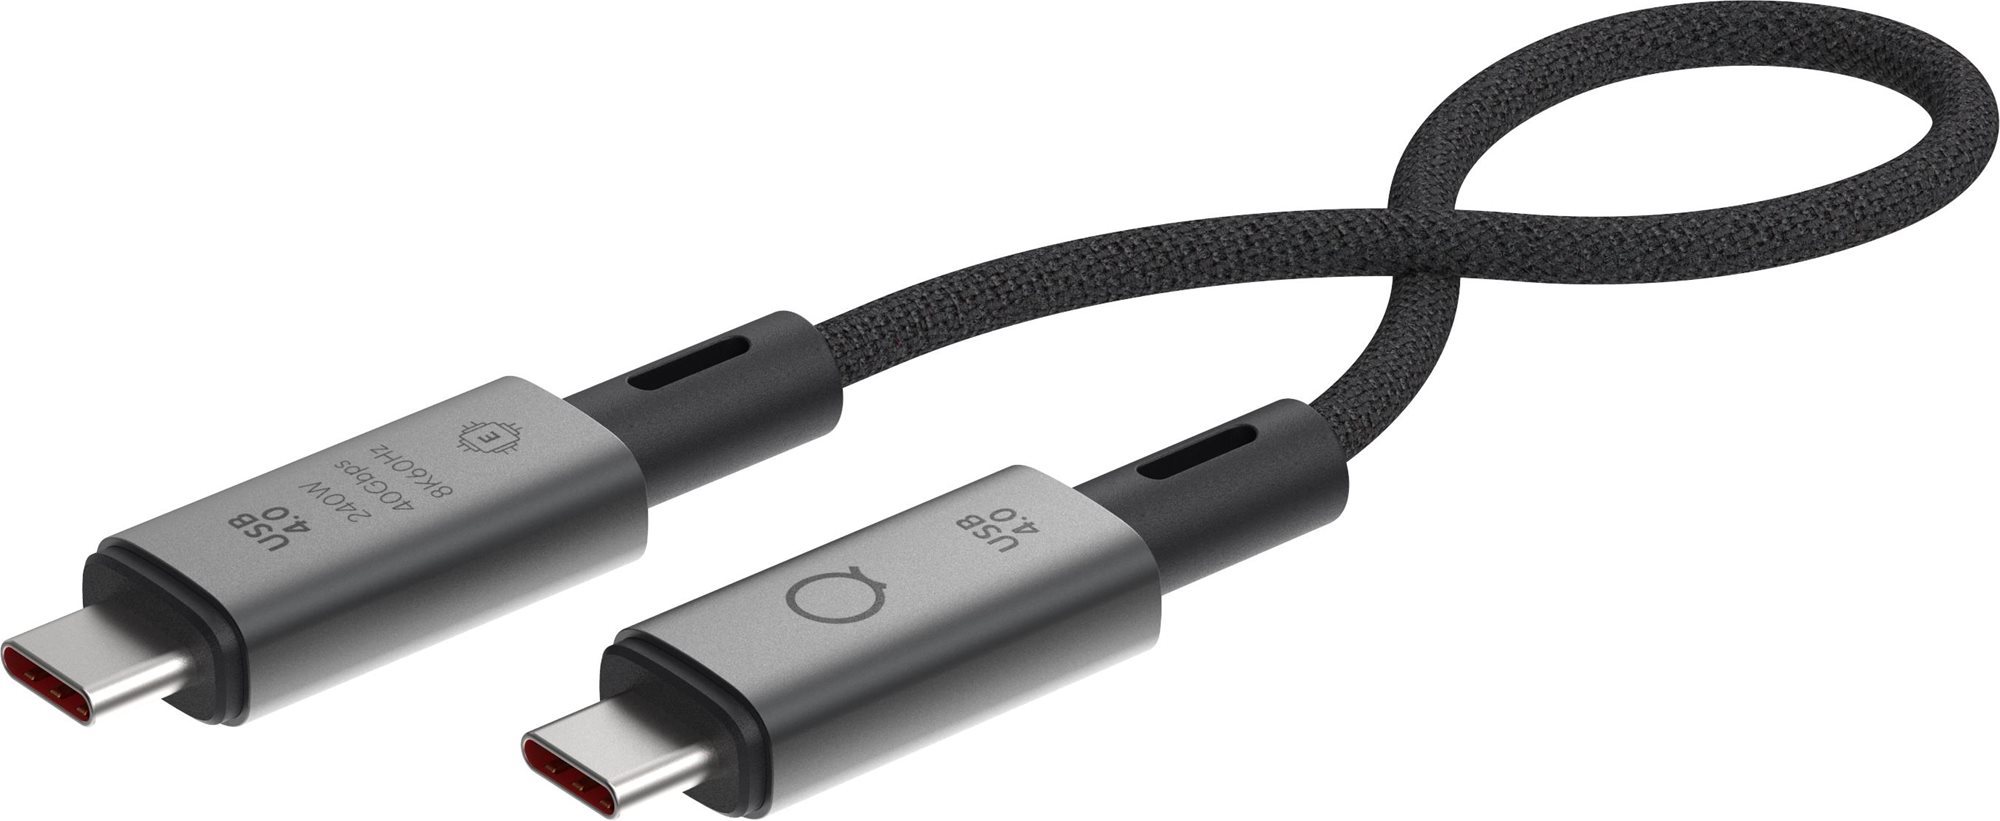 LINQ USB4 PRO Cable 0,3m - Space Grey